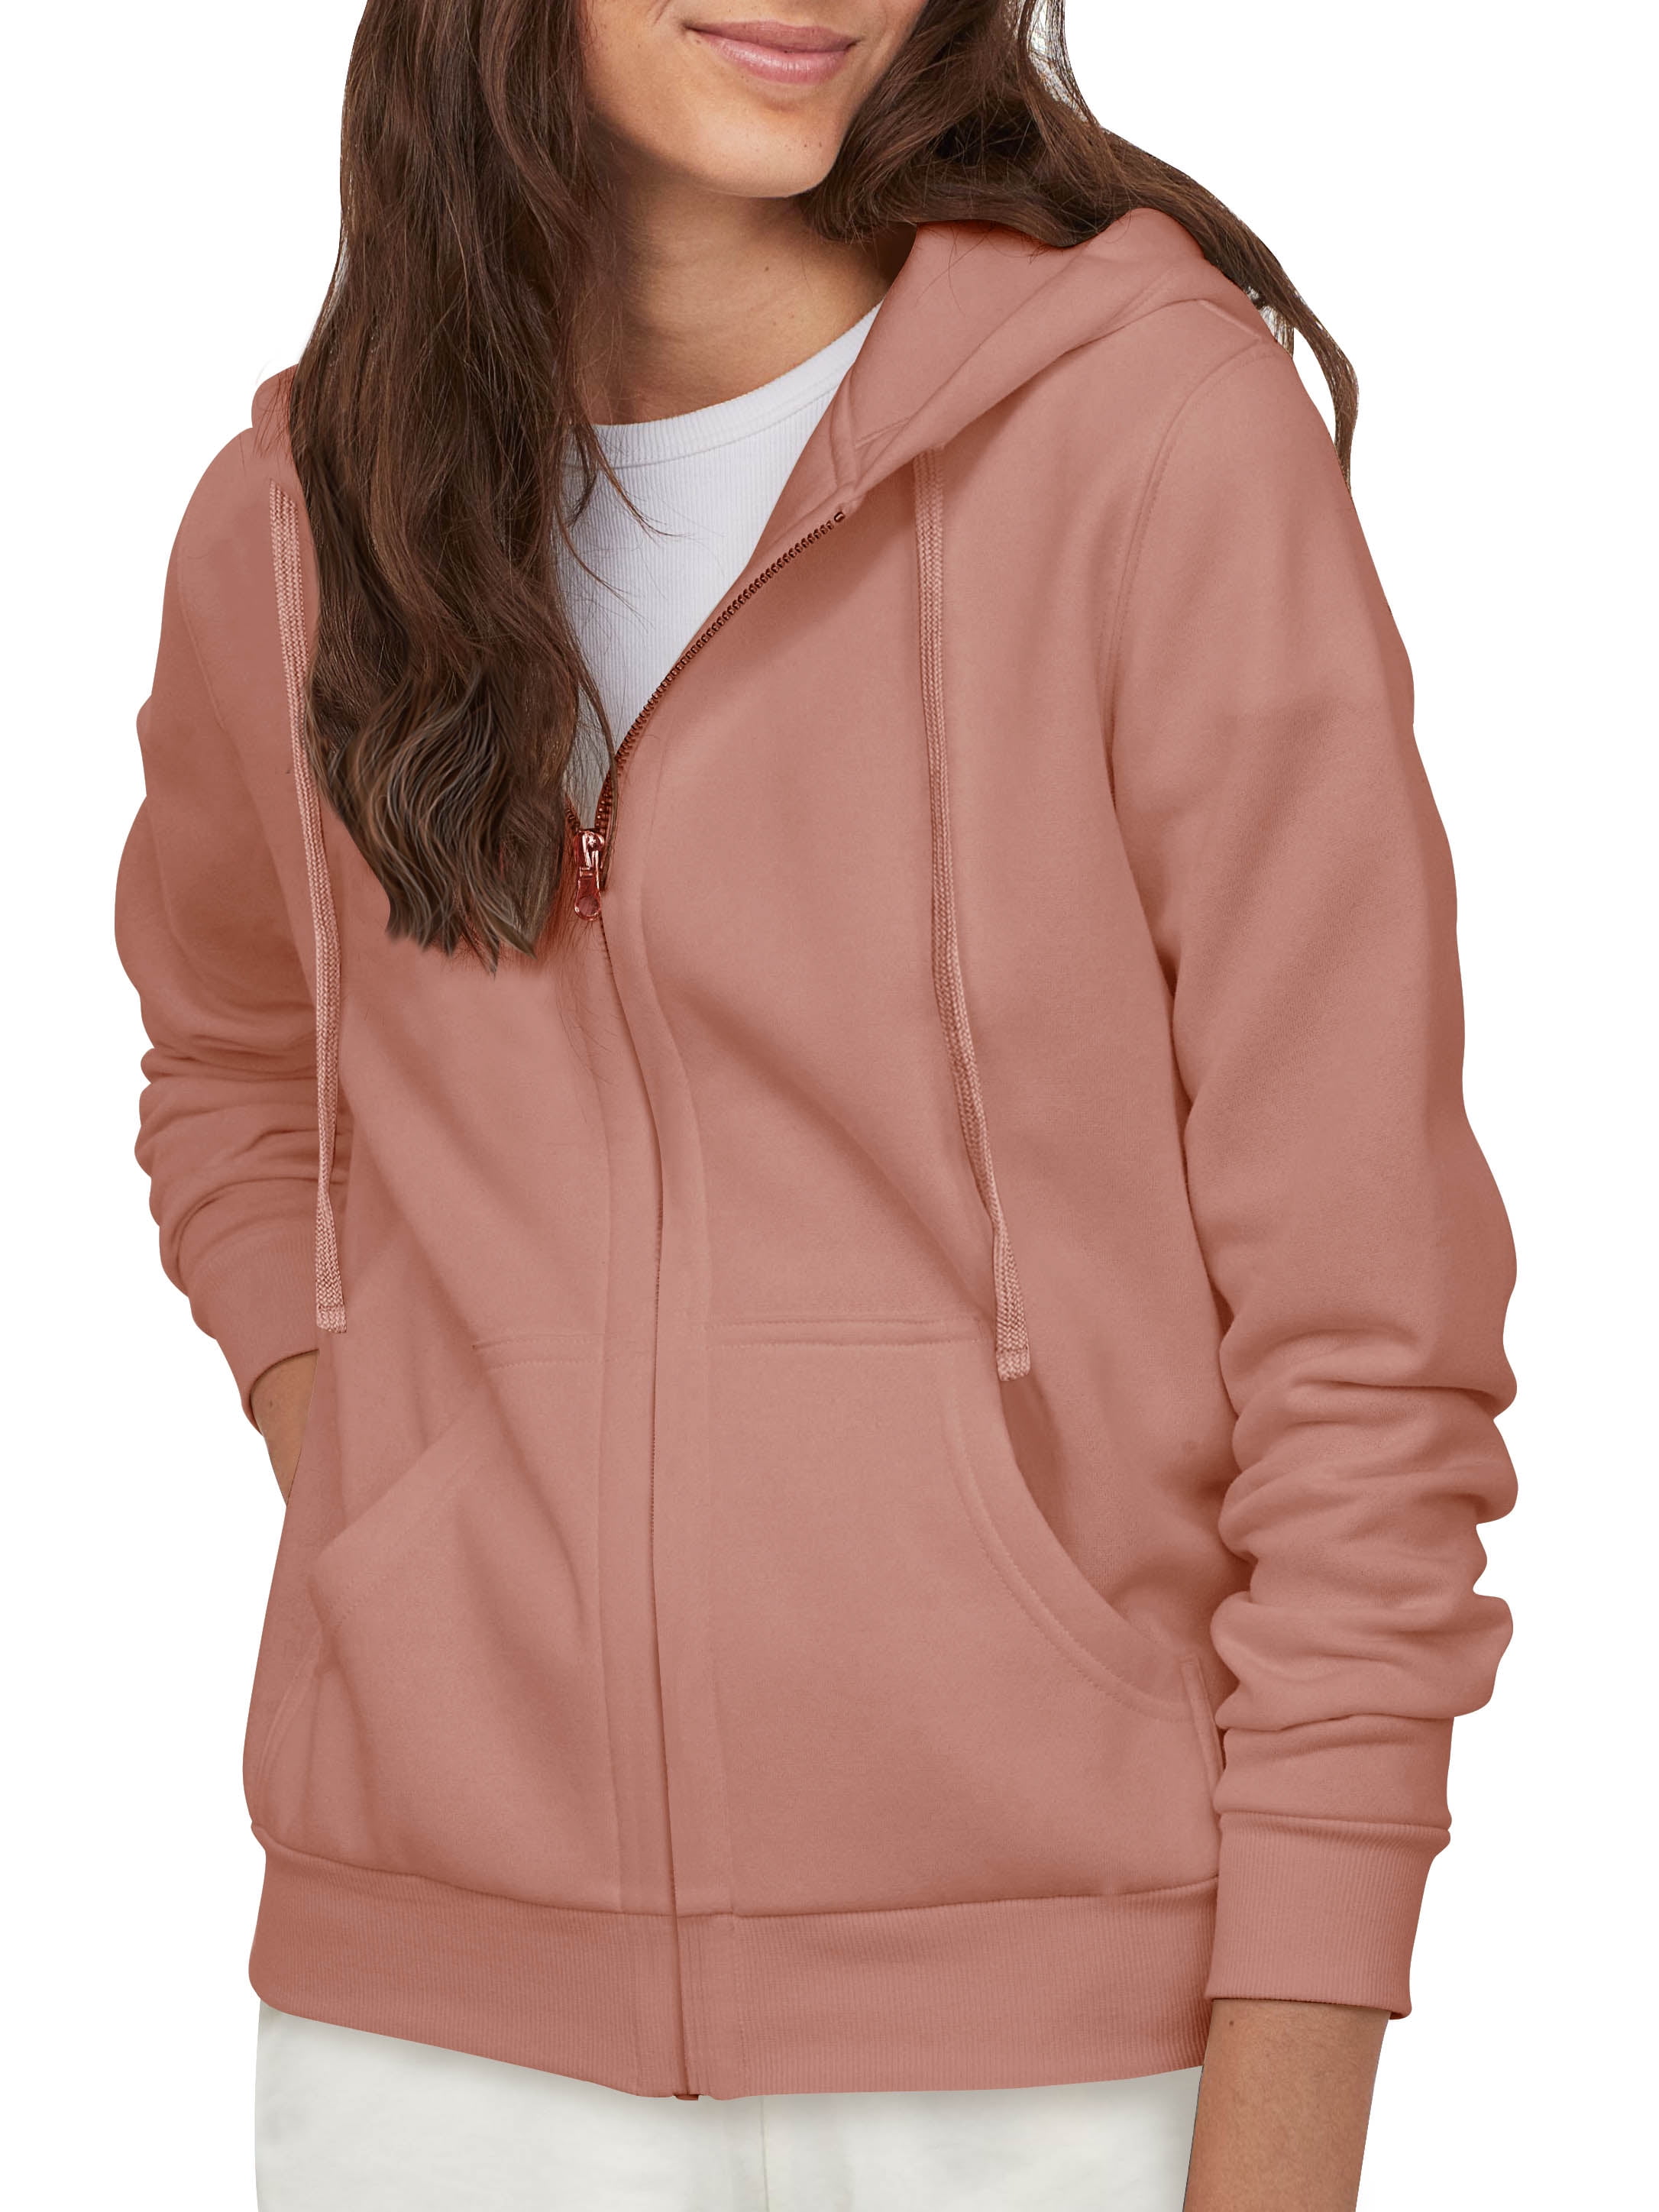 Hat and Beyond Women's Comfortable Wrinkle Resistant Cotton Zip Up Hoodie French Terry Sweatshirts - Walmart.com